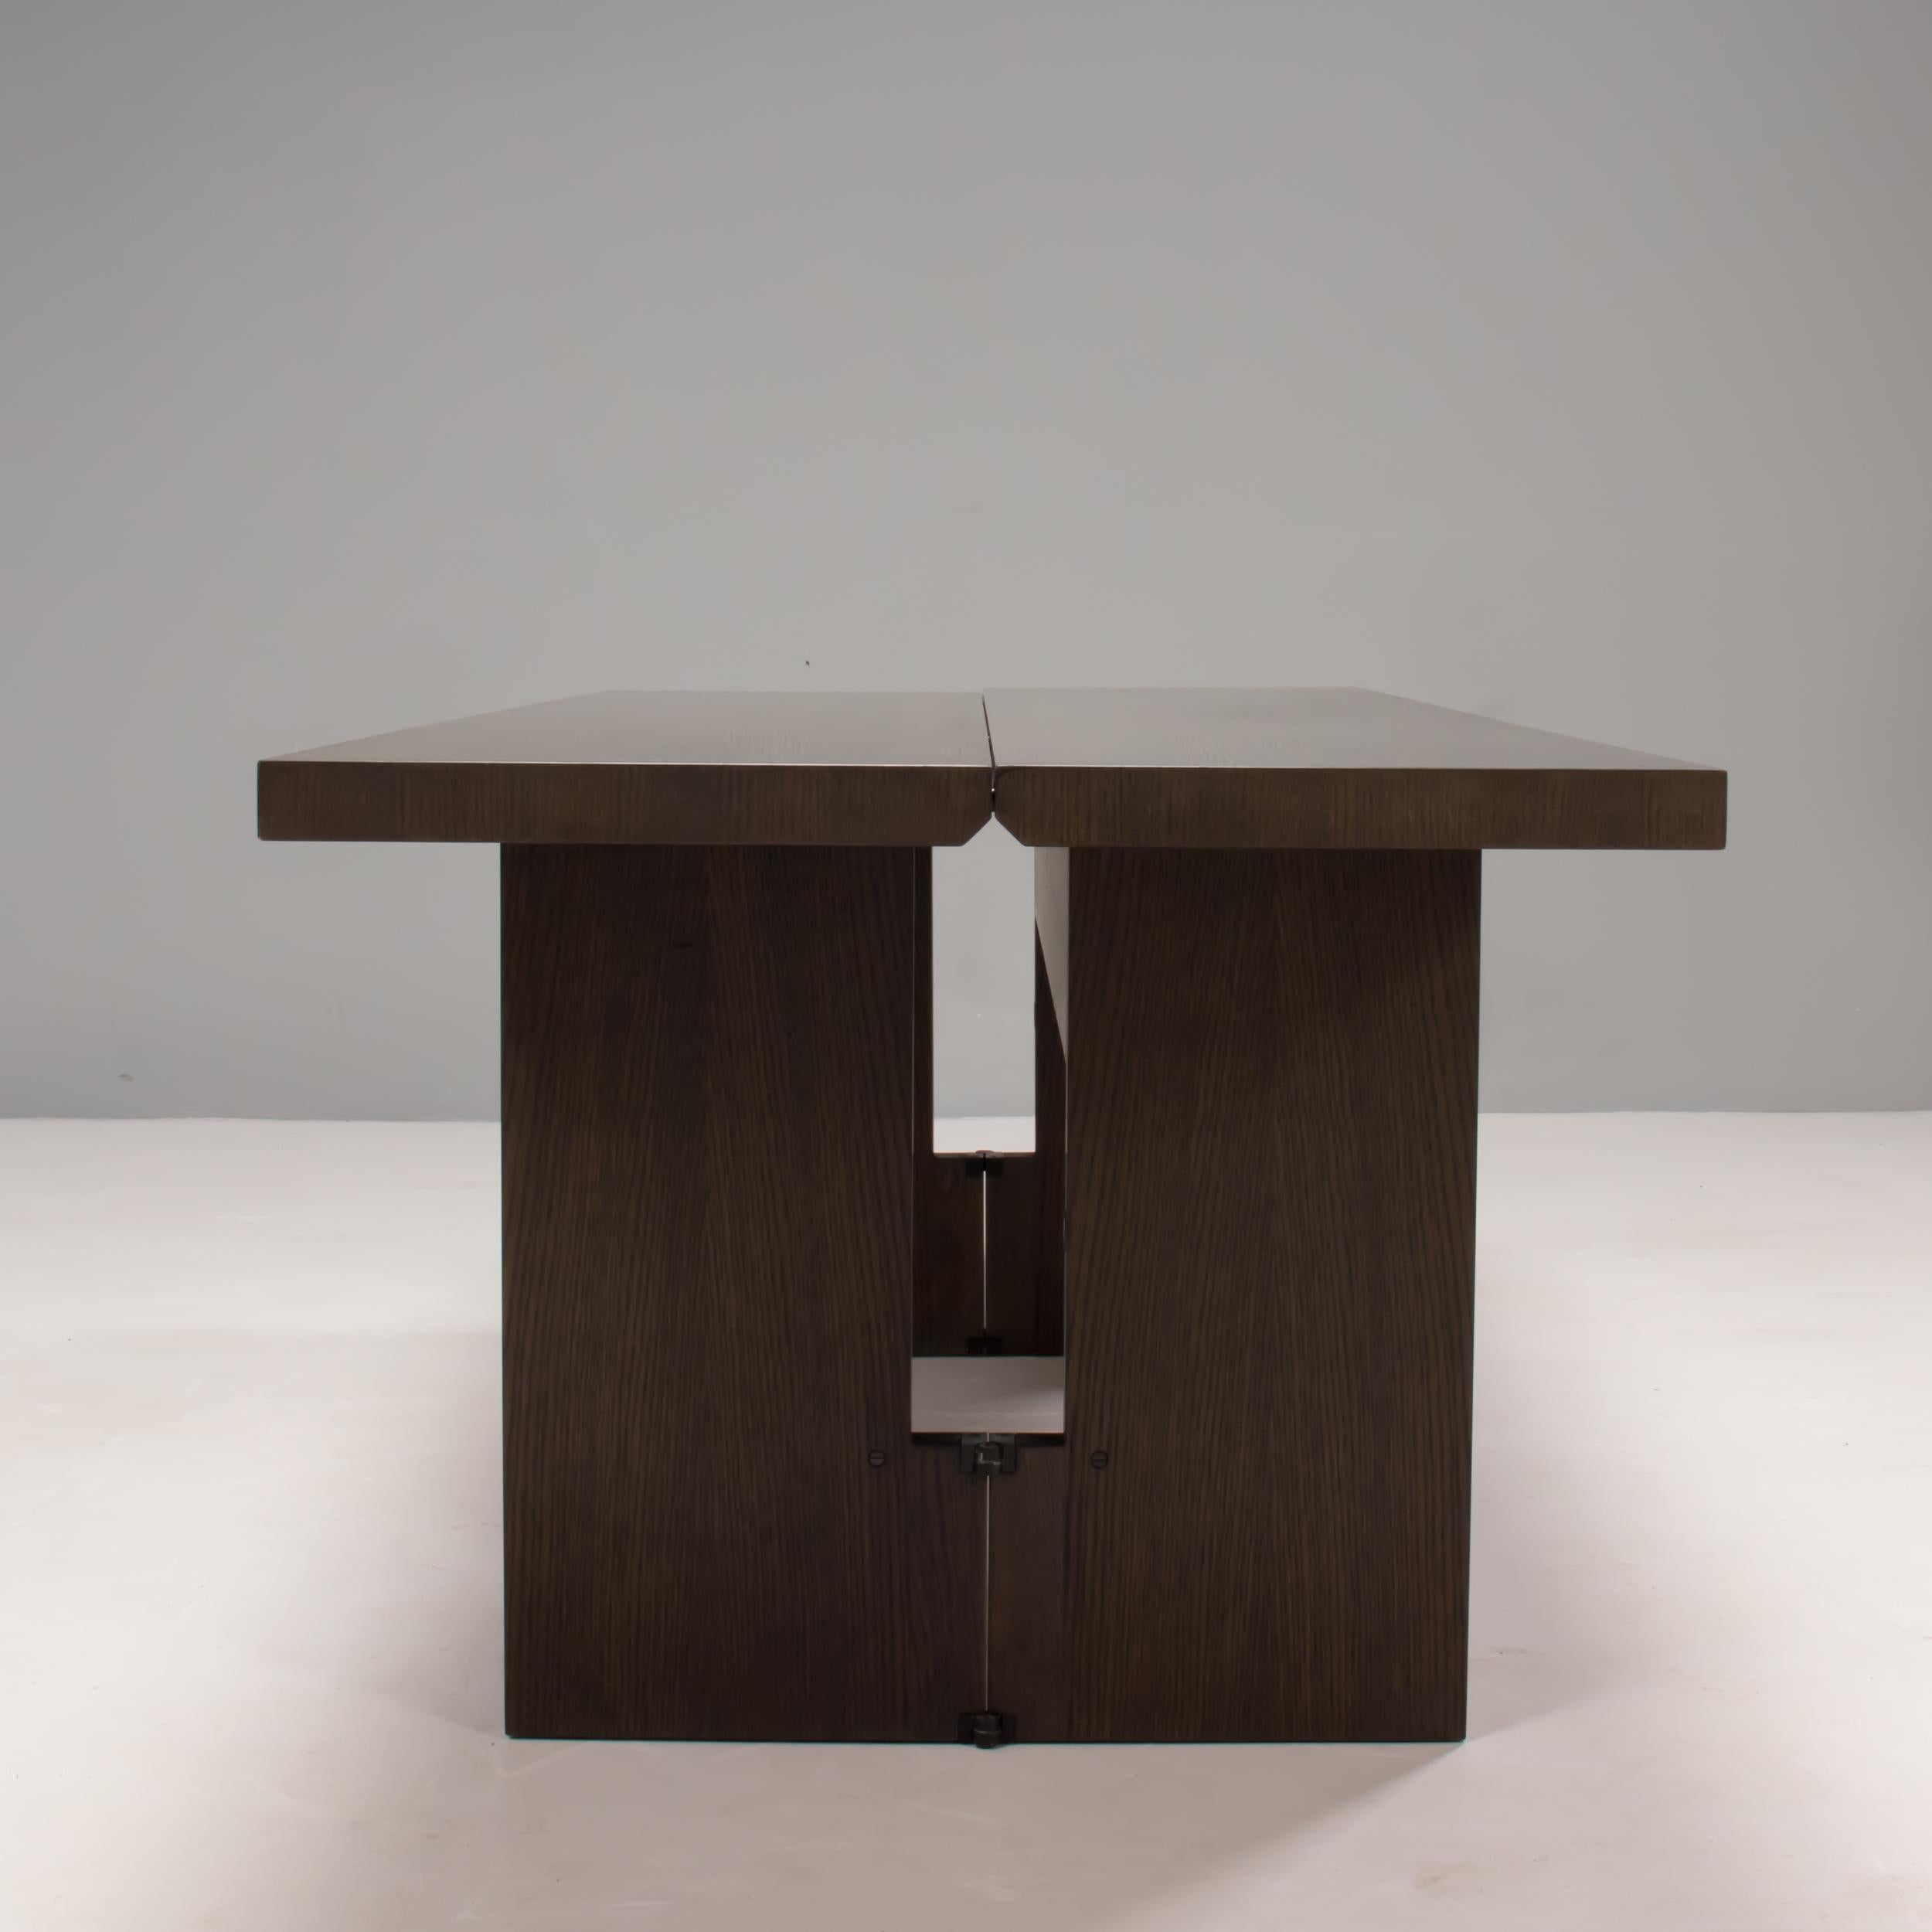 Designed by Antonio Citterio for Maxalto, the Sibilla table is a versatile piece of modern design which allows for multiple uses.

Constructed from solid oak, the table top is split into two leaves with hinges along the centre line. When fully